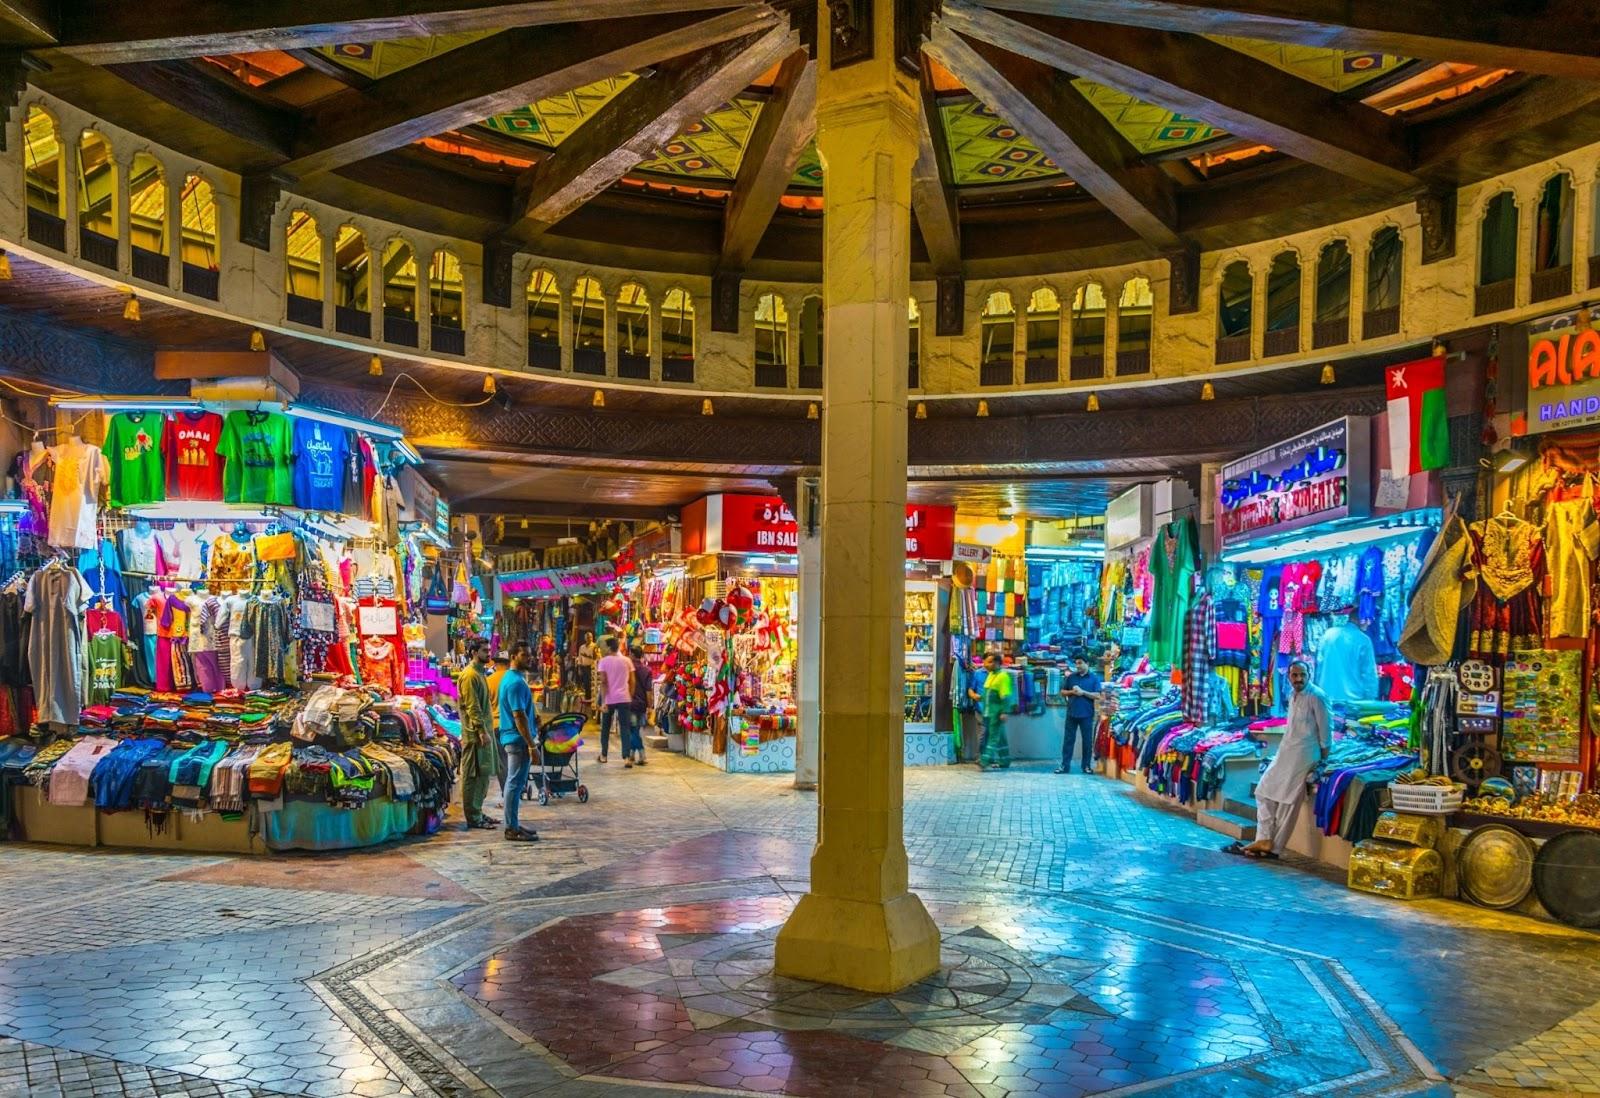 iew of the Muttrah souq in Muscat, Oman.